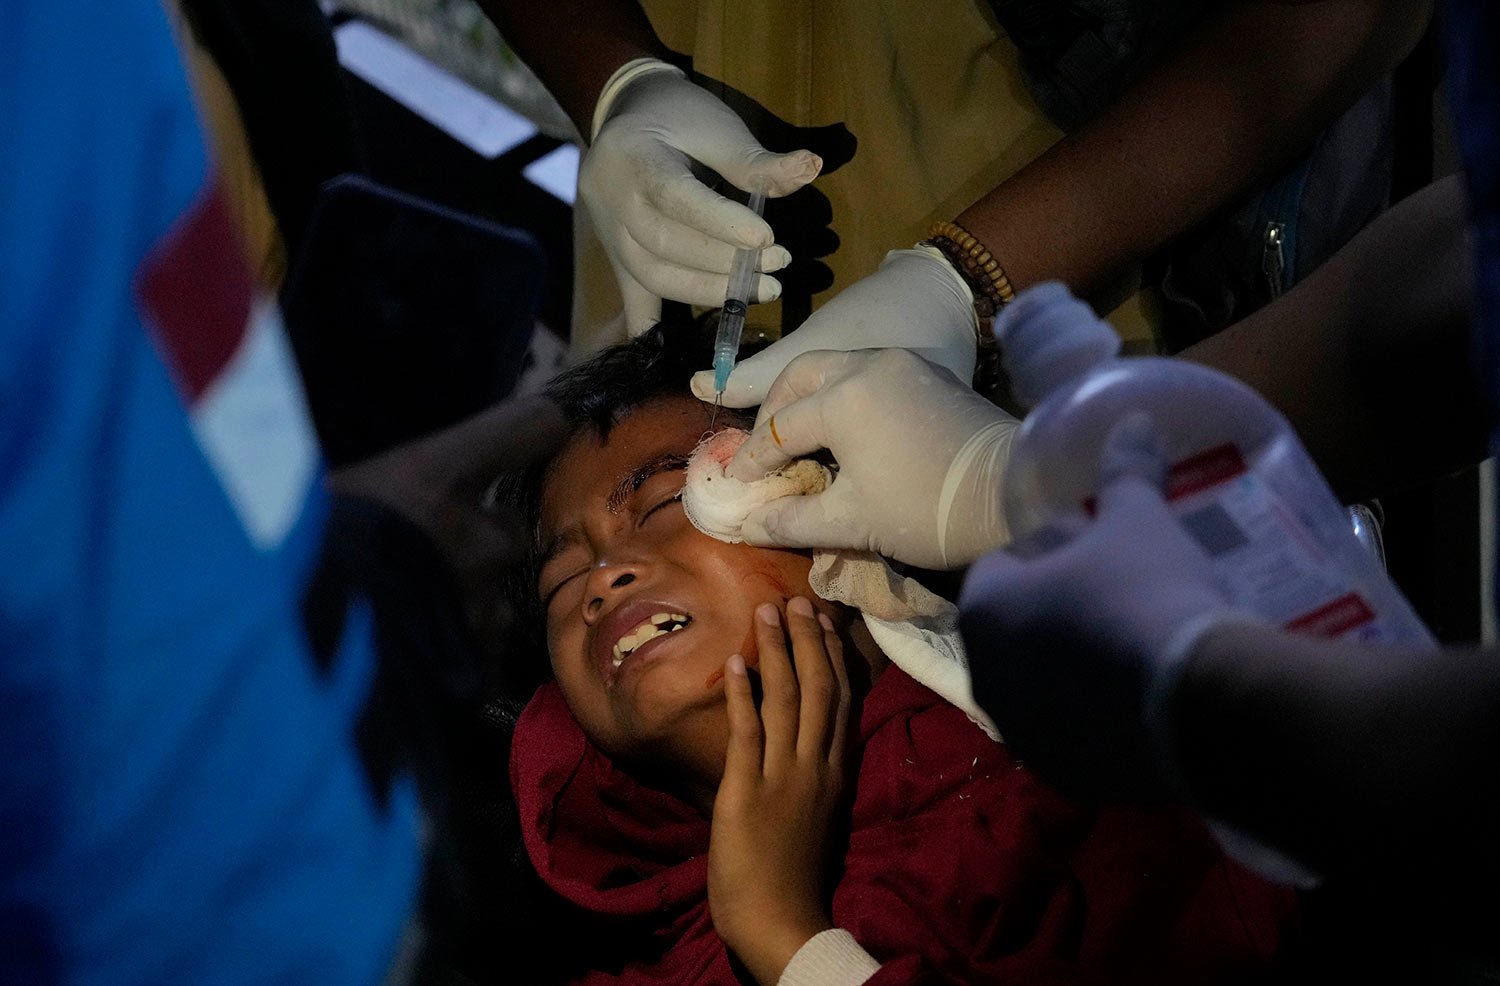  A young earthquake survivor receives medical treatment at a makeshift hospital in Cianjur, West Java, Indonesia, Monday, Nov. 21, 2022.  (AP Photo/Tatan Syuflana) 